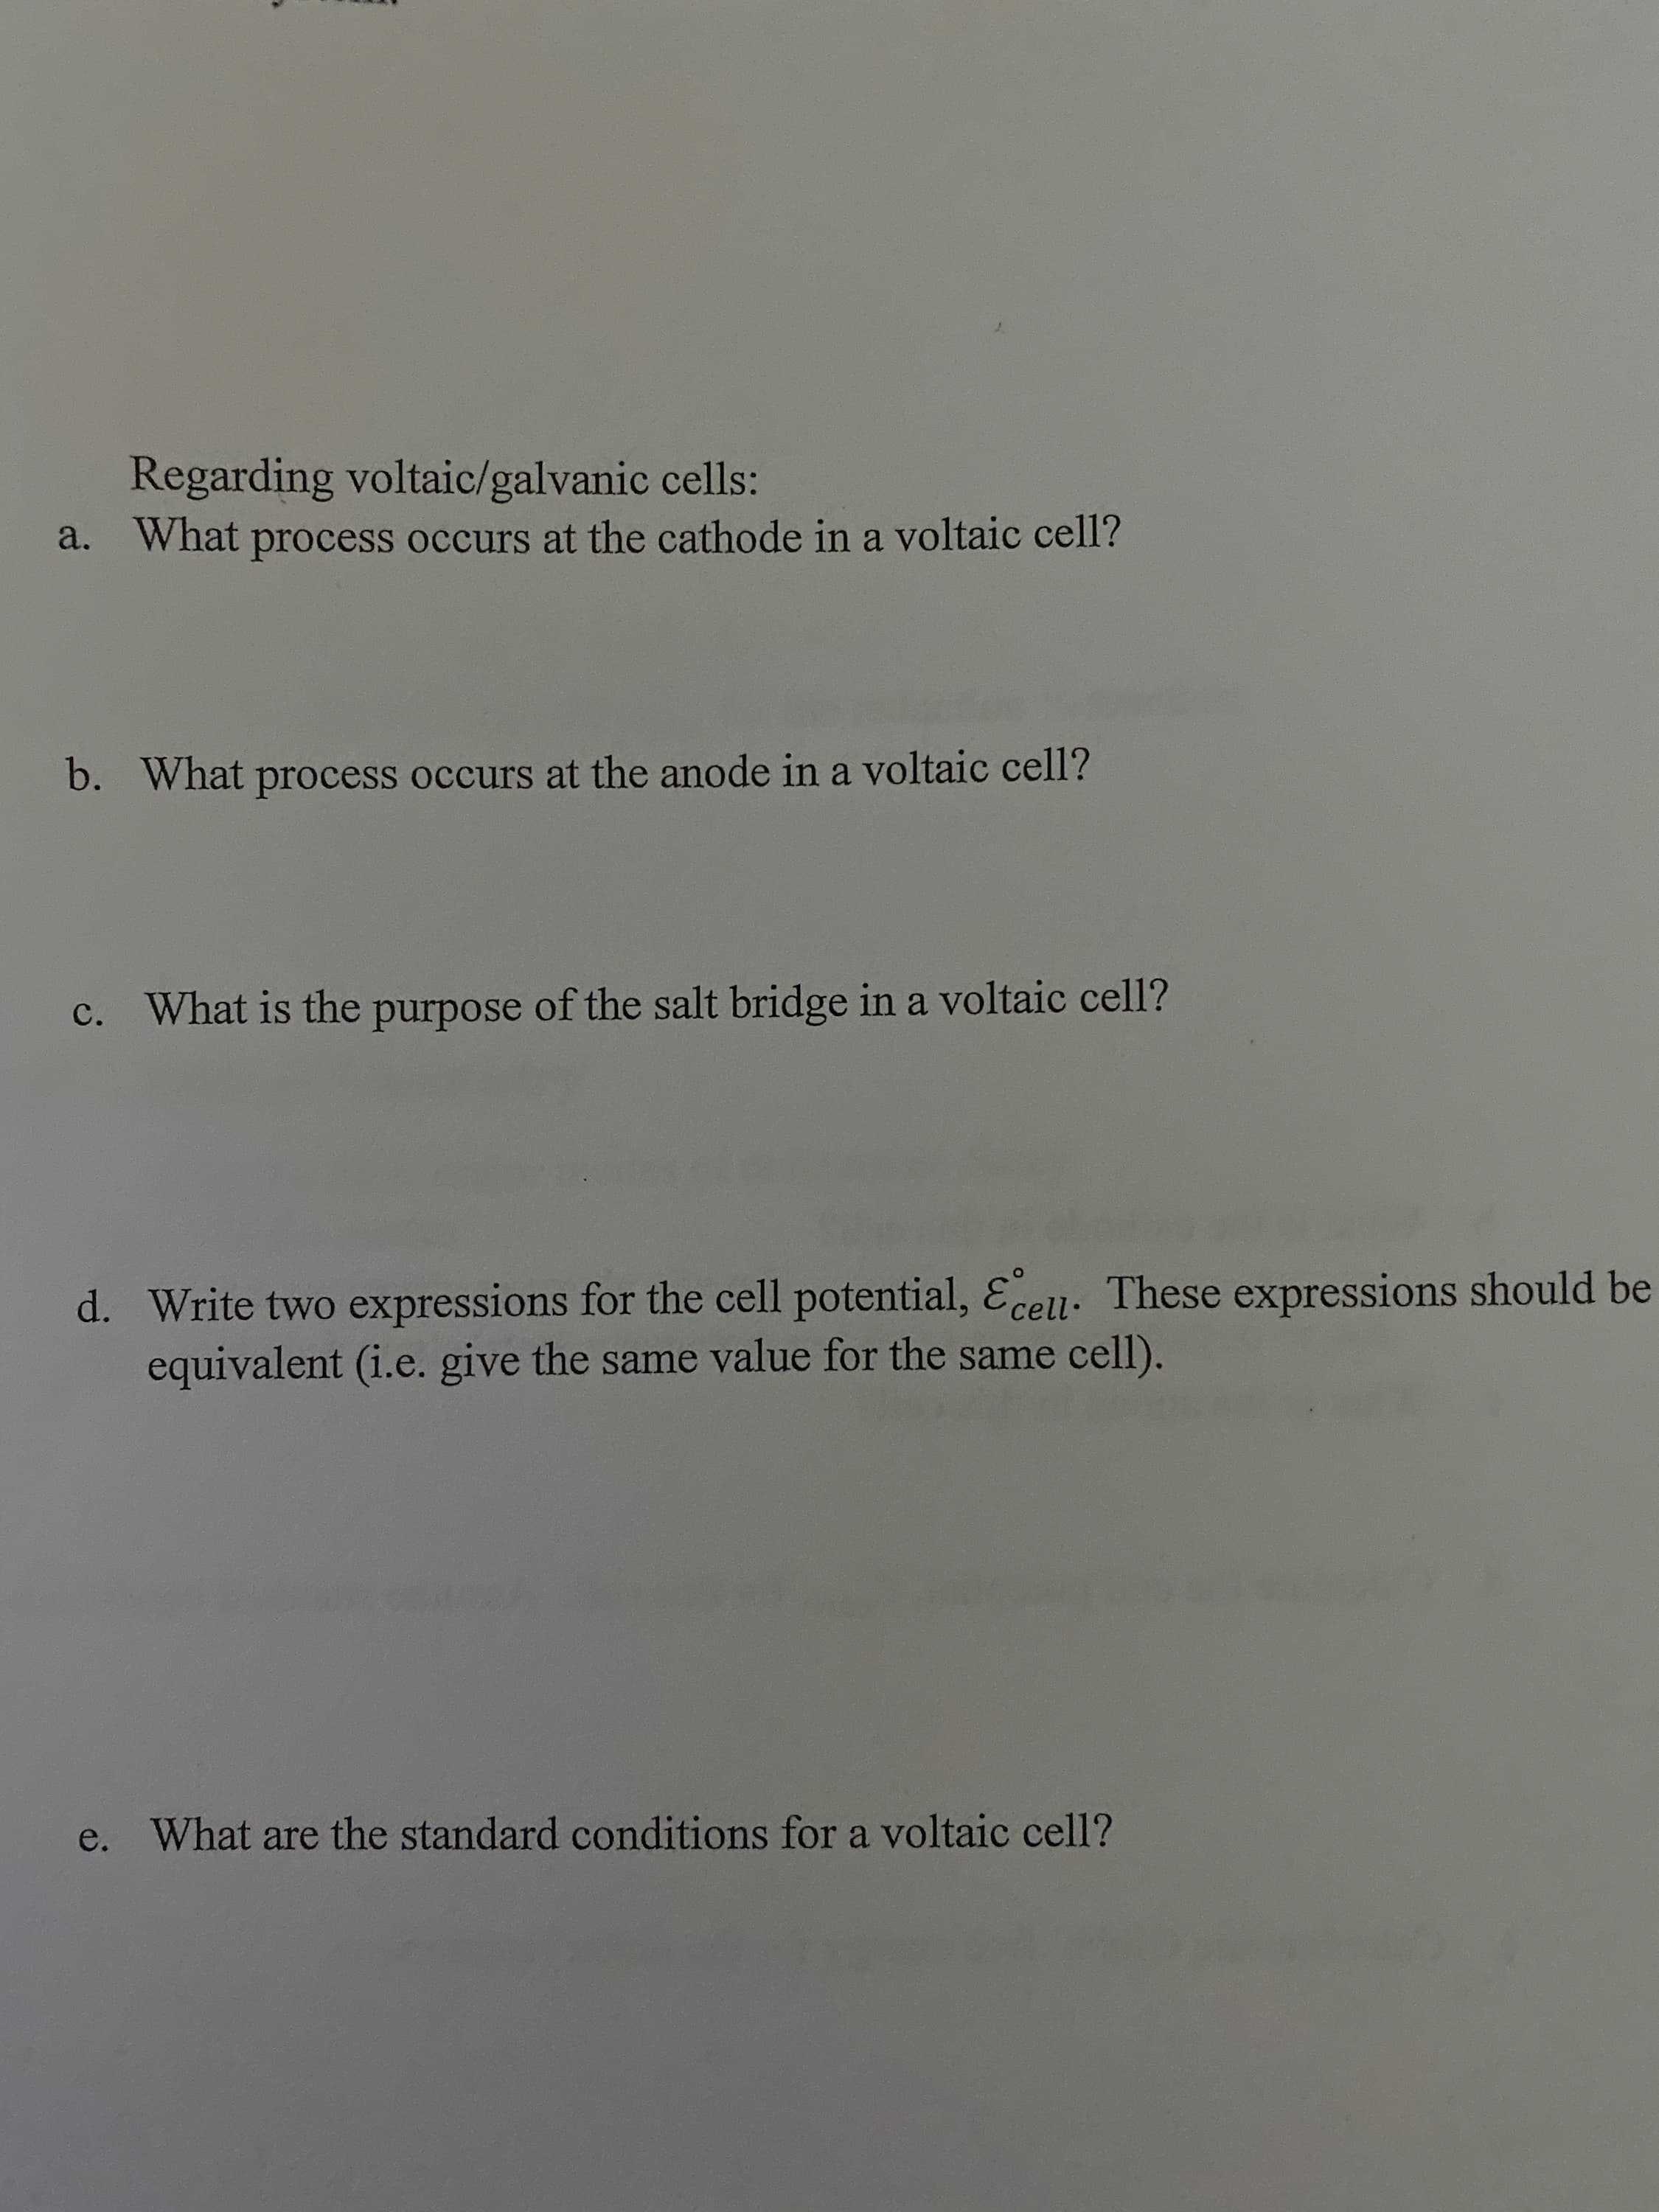 Regarding voltaic/galvanic cells:
What process occurs at the cathode in a voltaic cell?
a.
What process occurs at the anode in a voltaic cell?
b.
purpose of the salt bridge in a voltaic cell?
c. What is the
d. Write two expressions for the cell potential, Ecell. These expressions should be
equivalent (i.e. give the same value for the same cell).
What are the standard conditions for a voltaic cell?
e.
